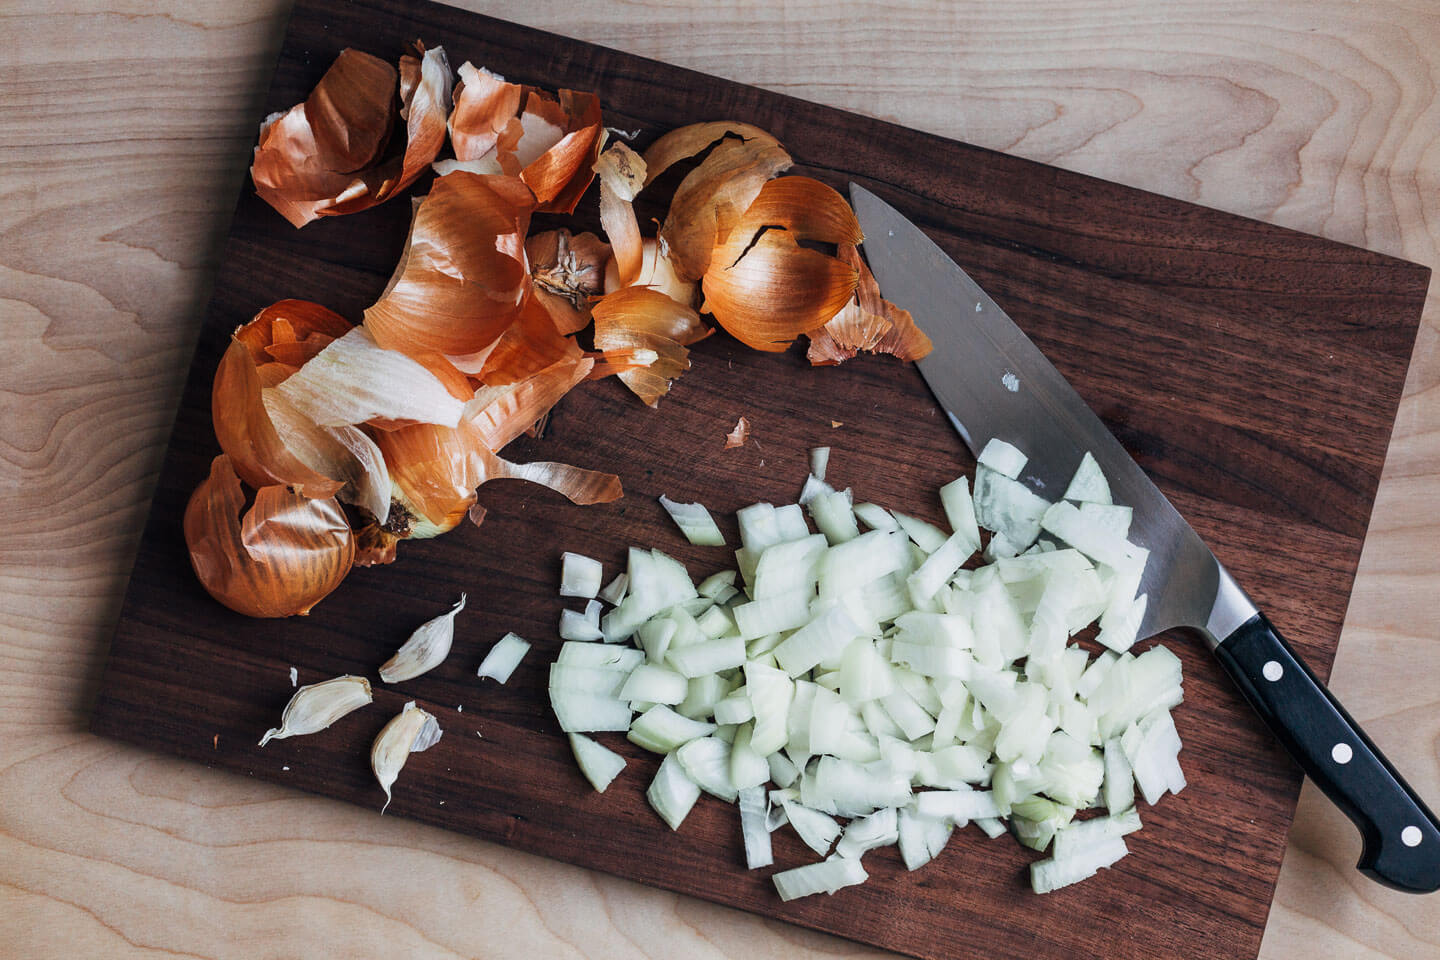 A cutting board with onion skins and diced onions.